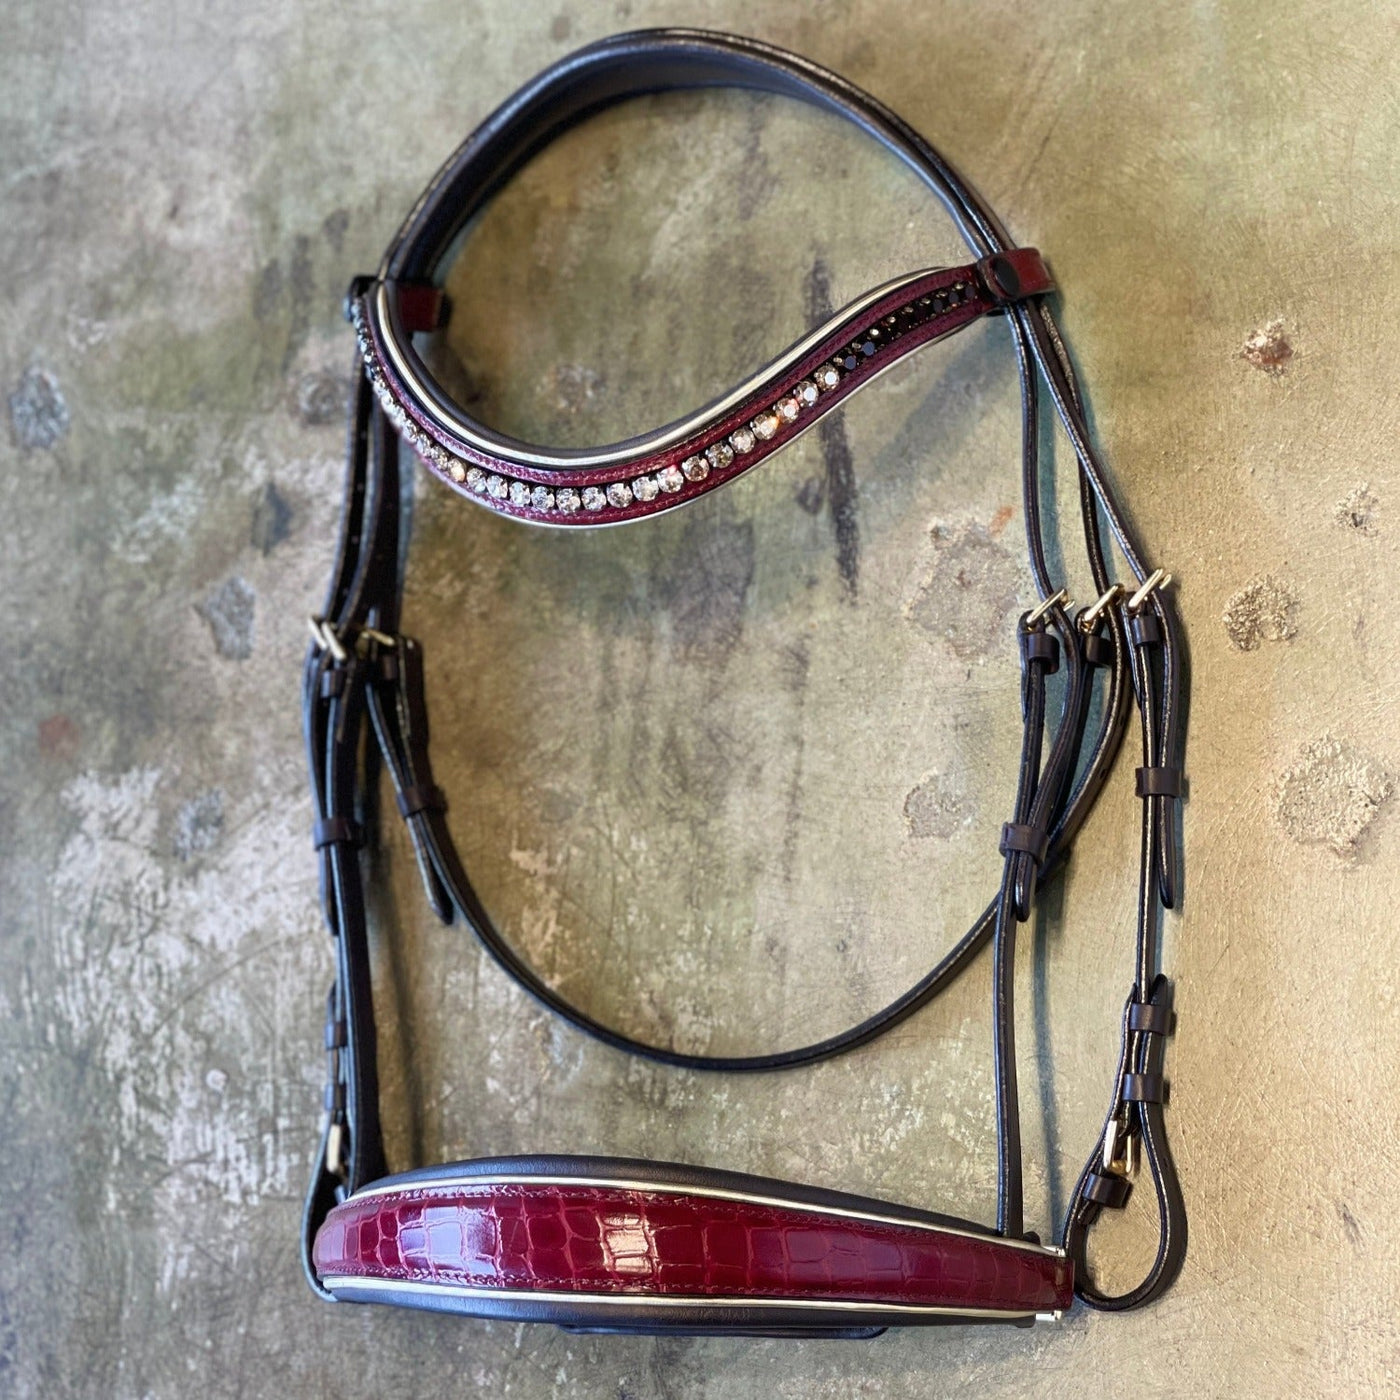 The Centerfold - Brown Leather & Burgundy Croc Snaffle Bridle